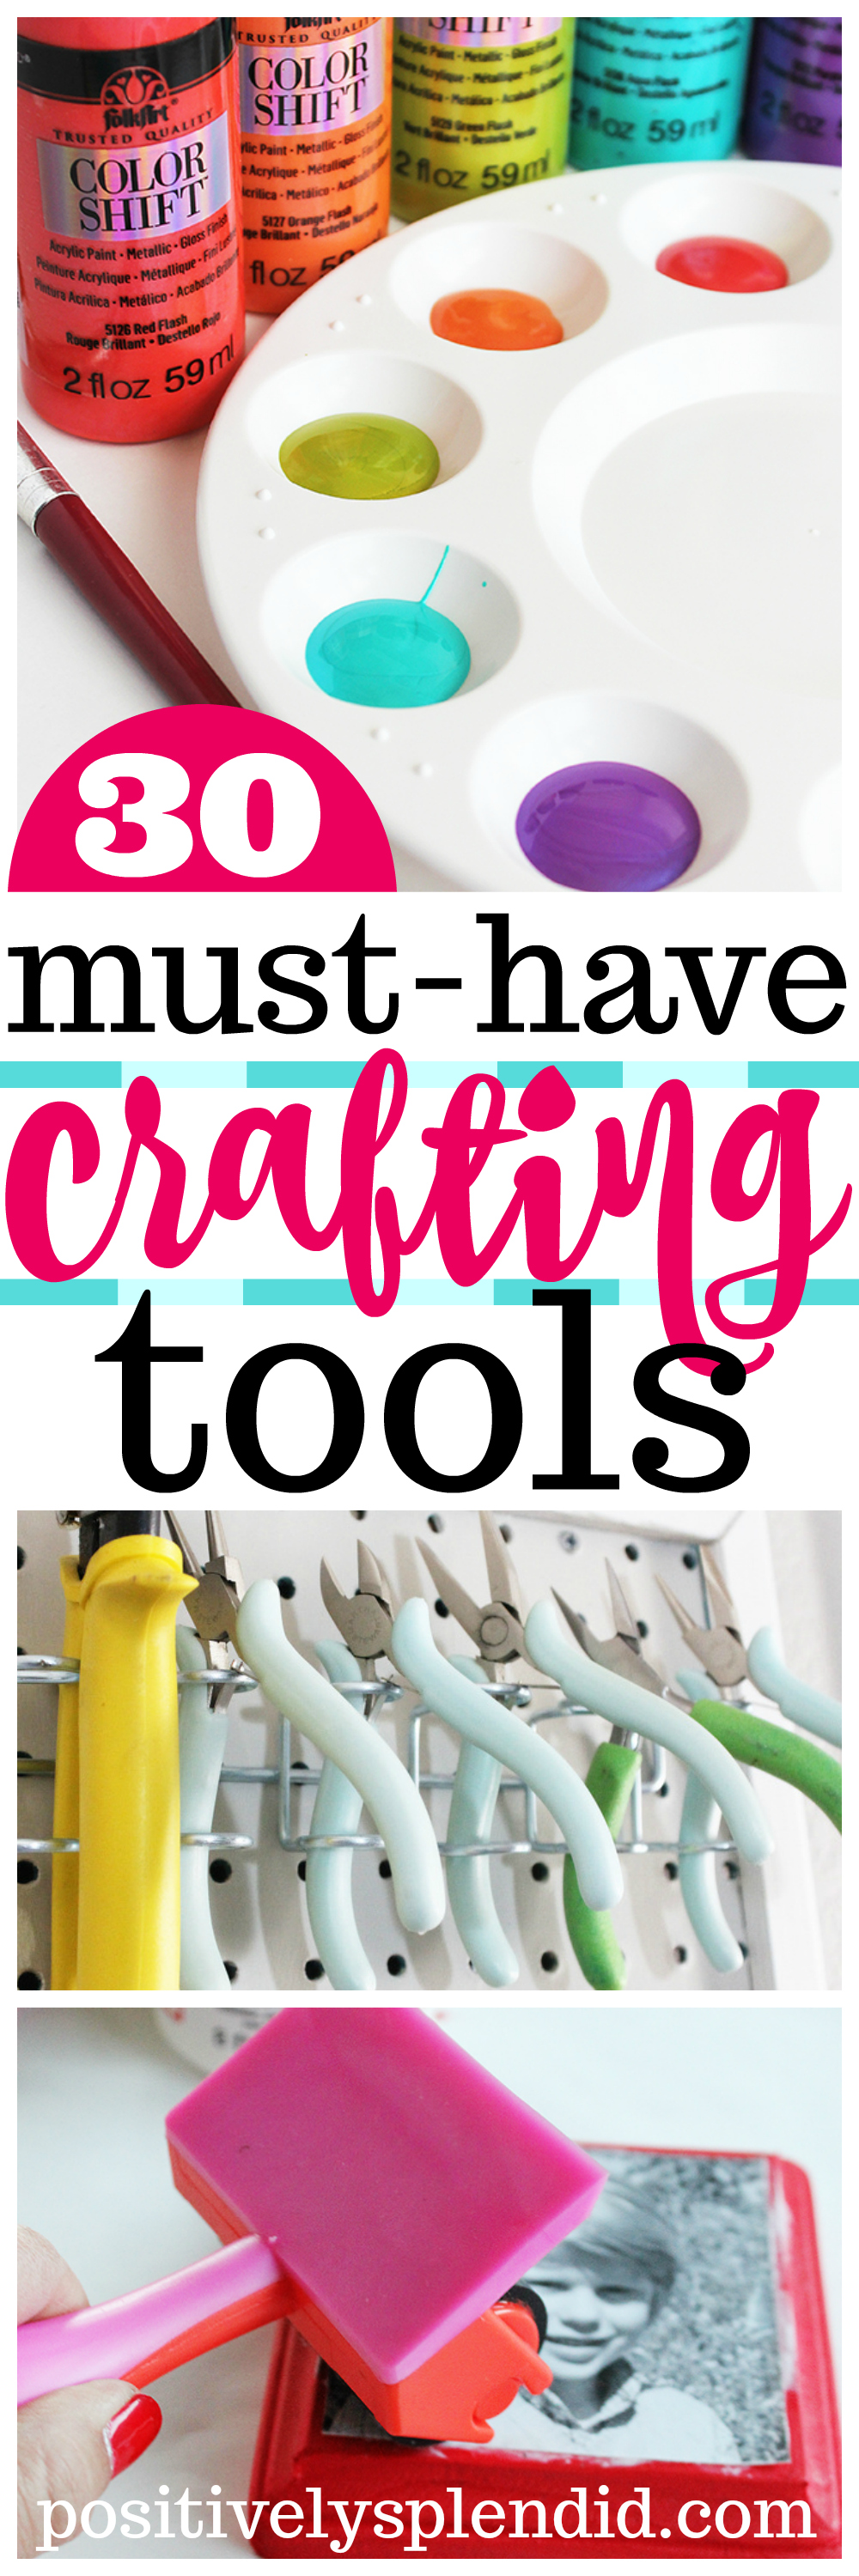 Arts, Crafts & Sewing - Devices & Accessories Categories